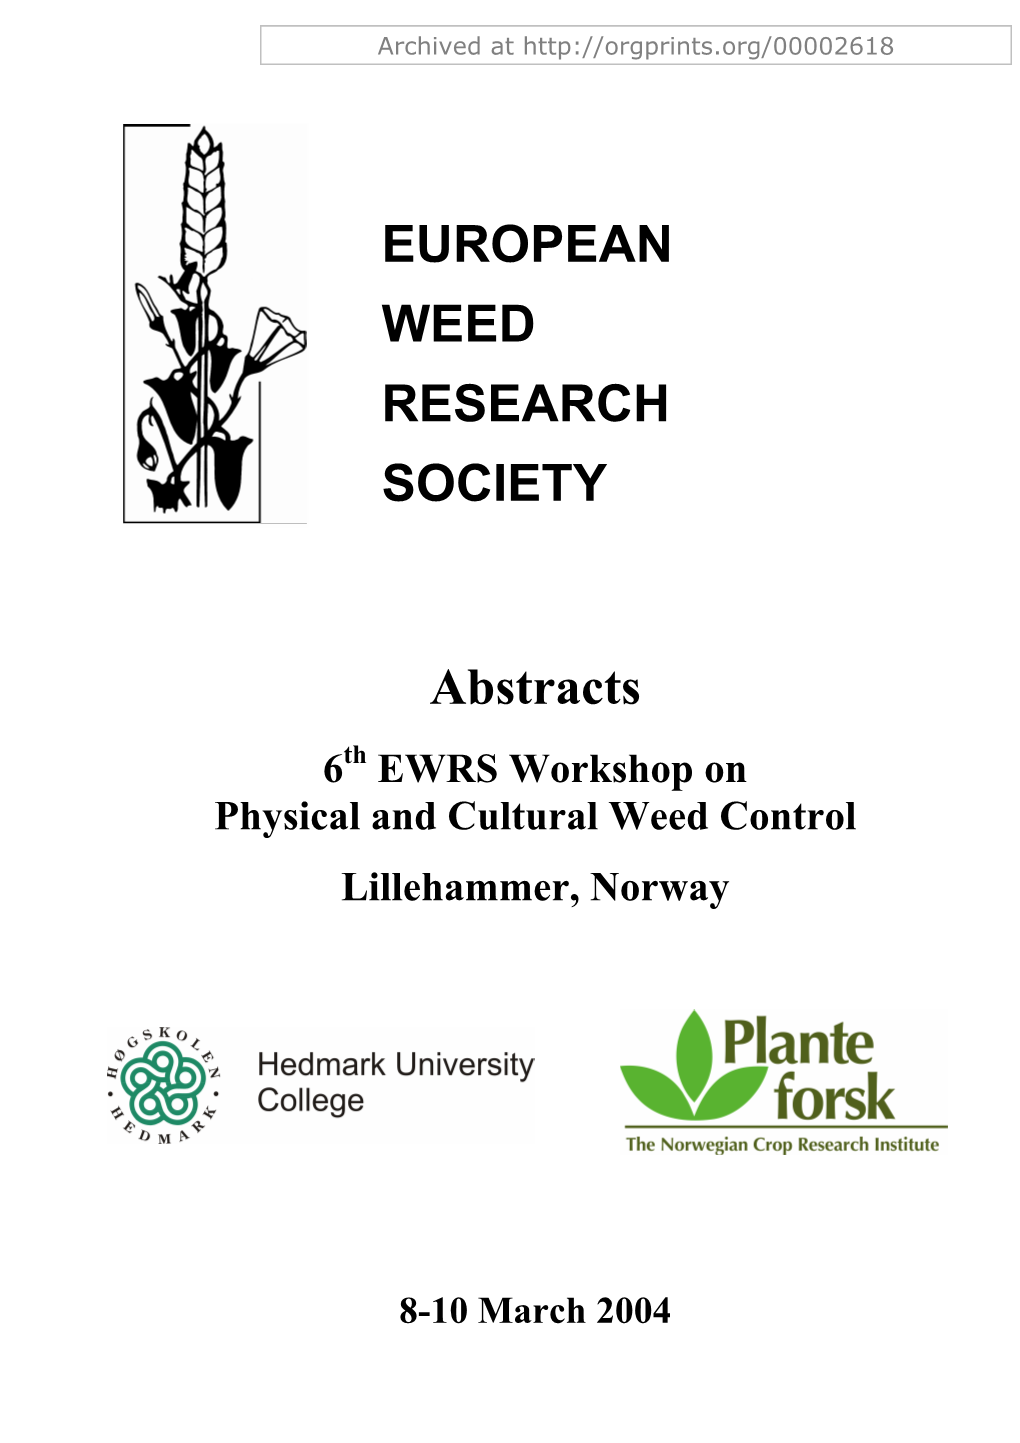 6Th EWRS Workshop on Physical and Cultural Weed Control